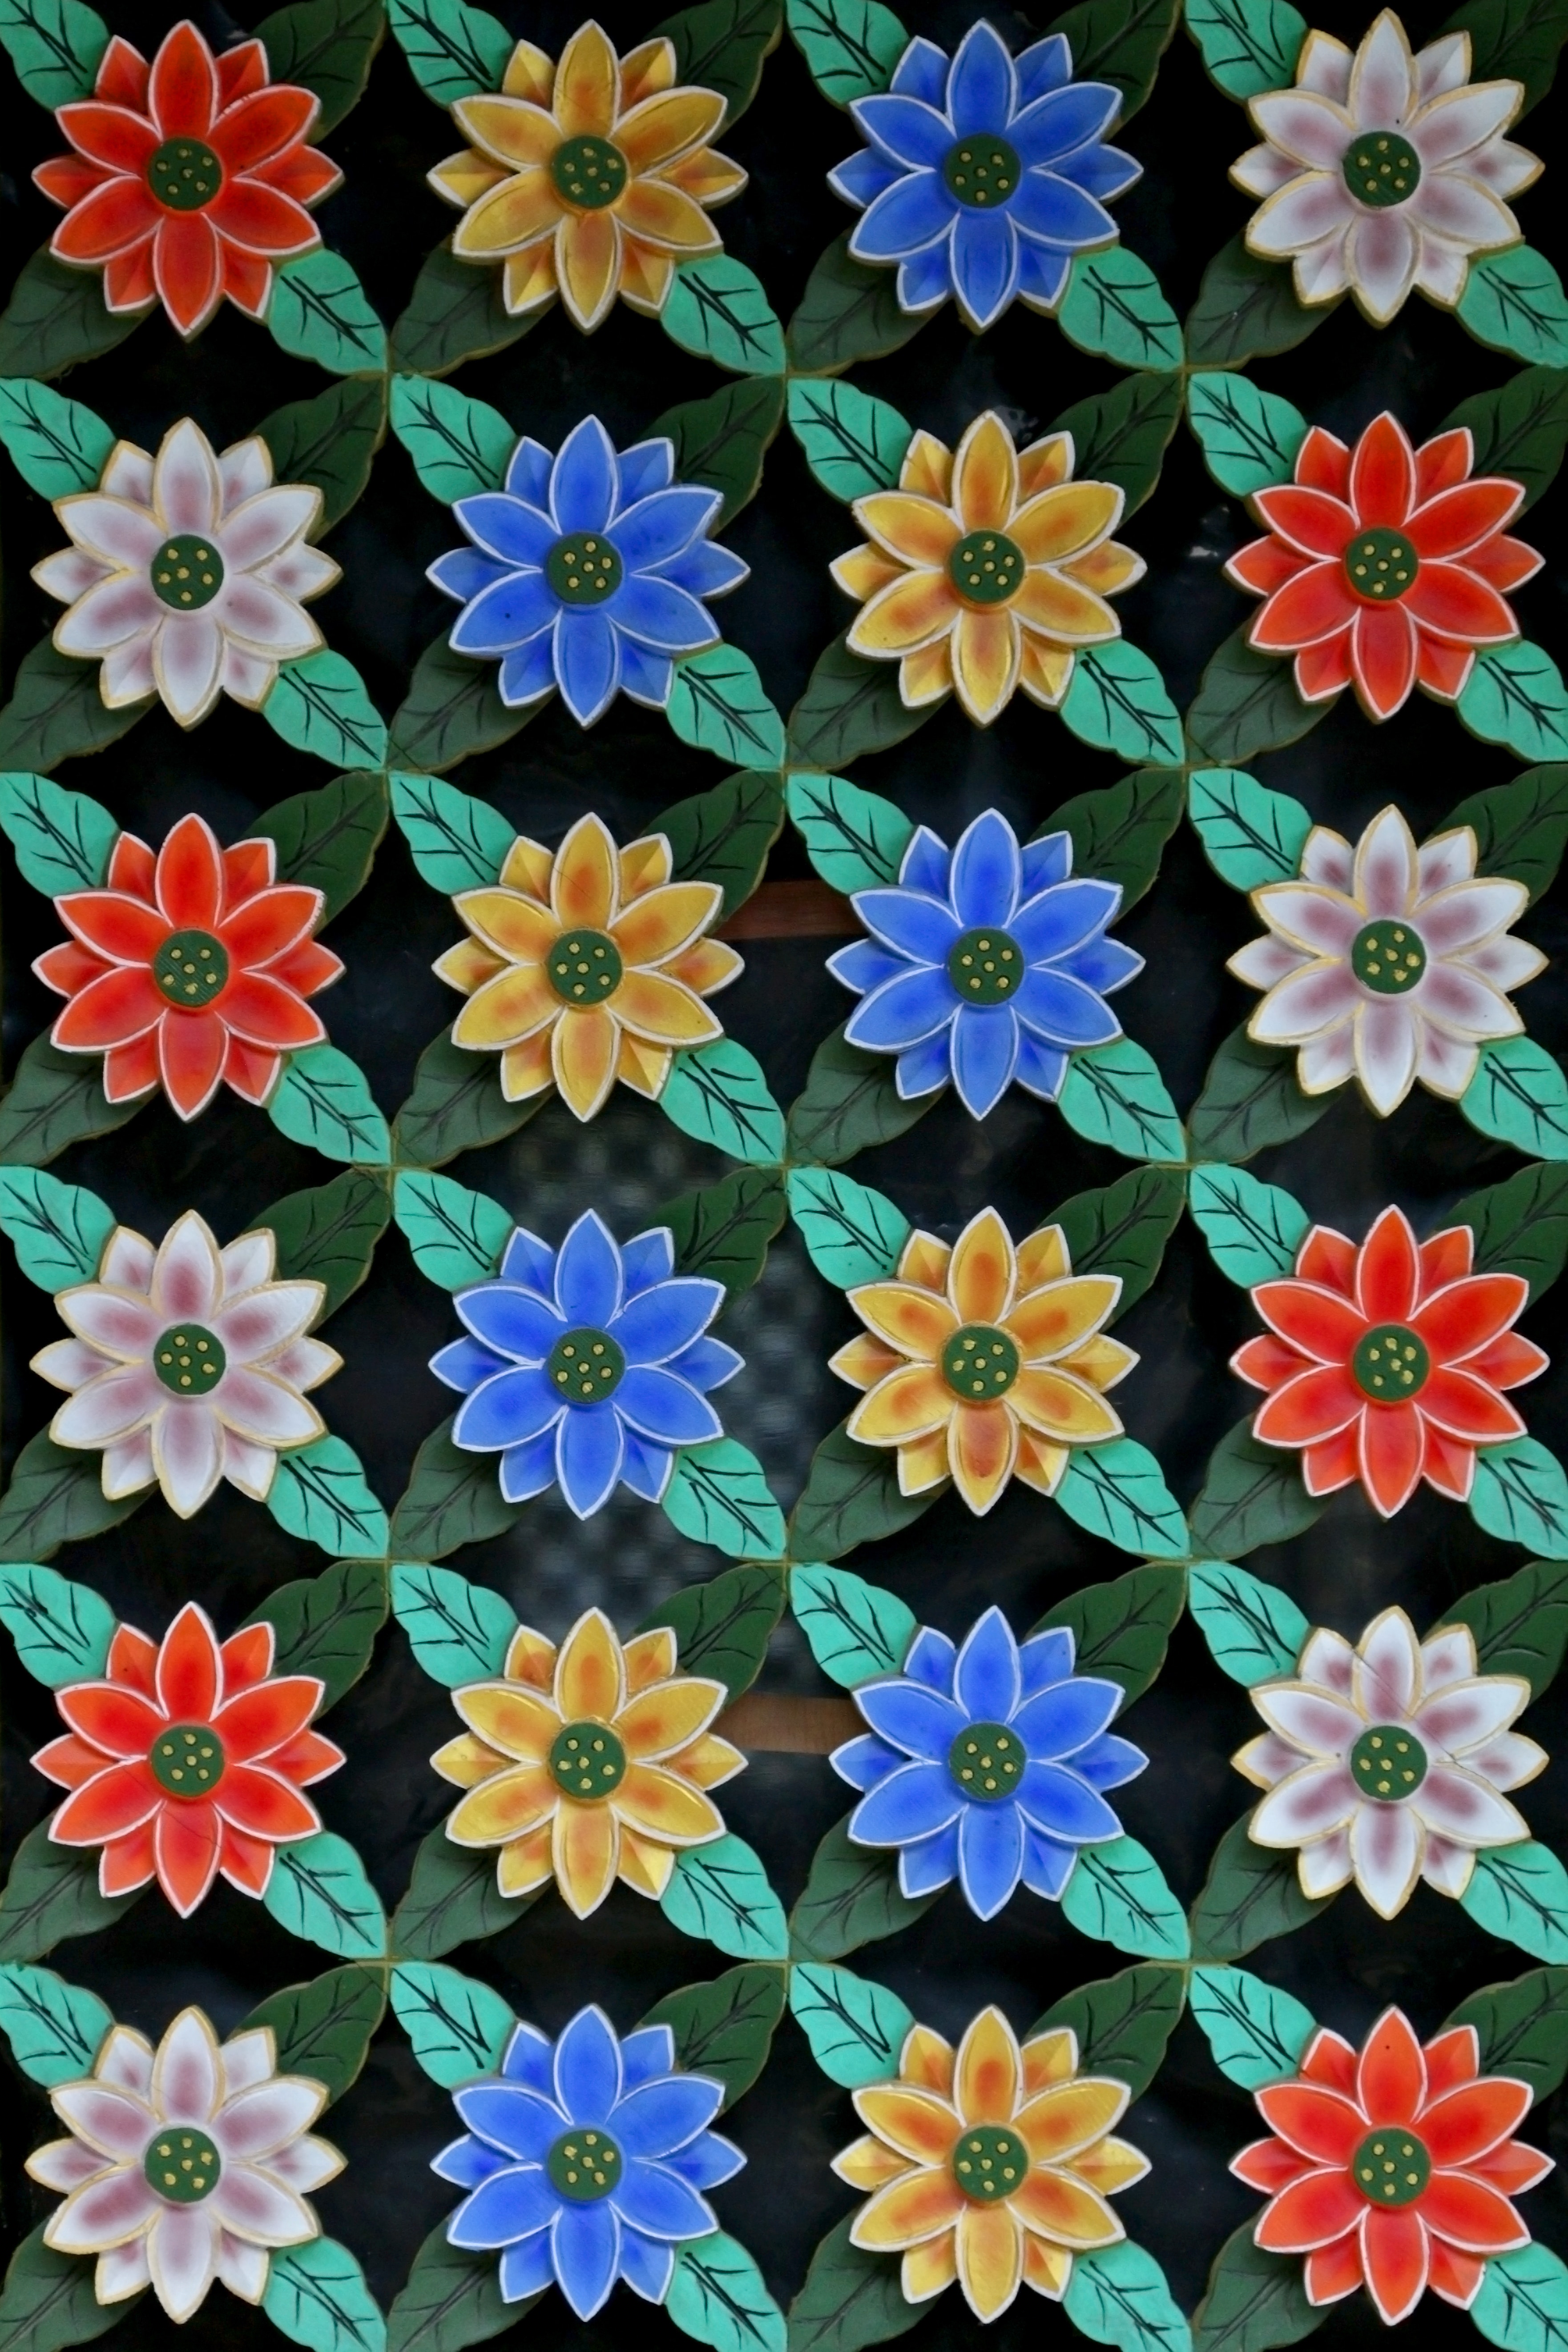 Popular Floral Image for Phone